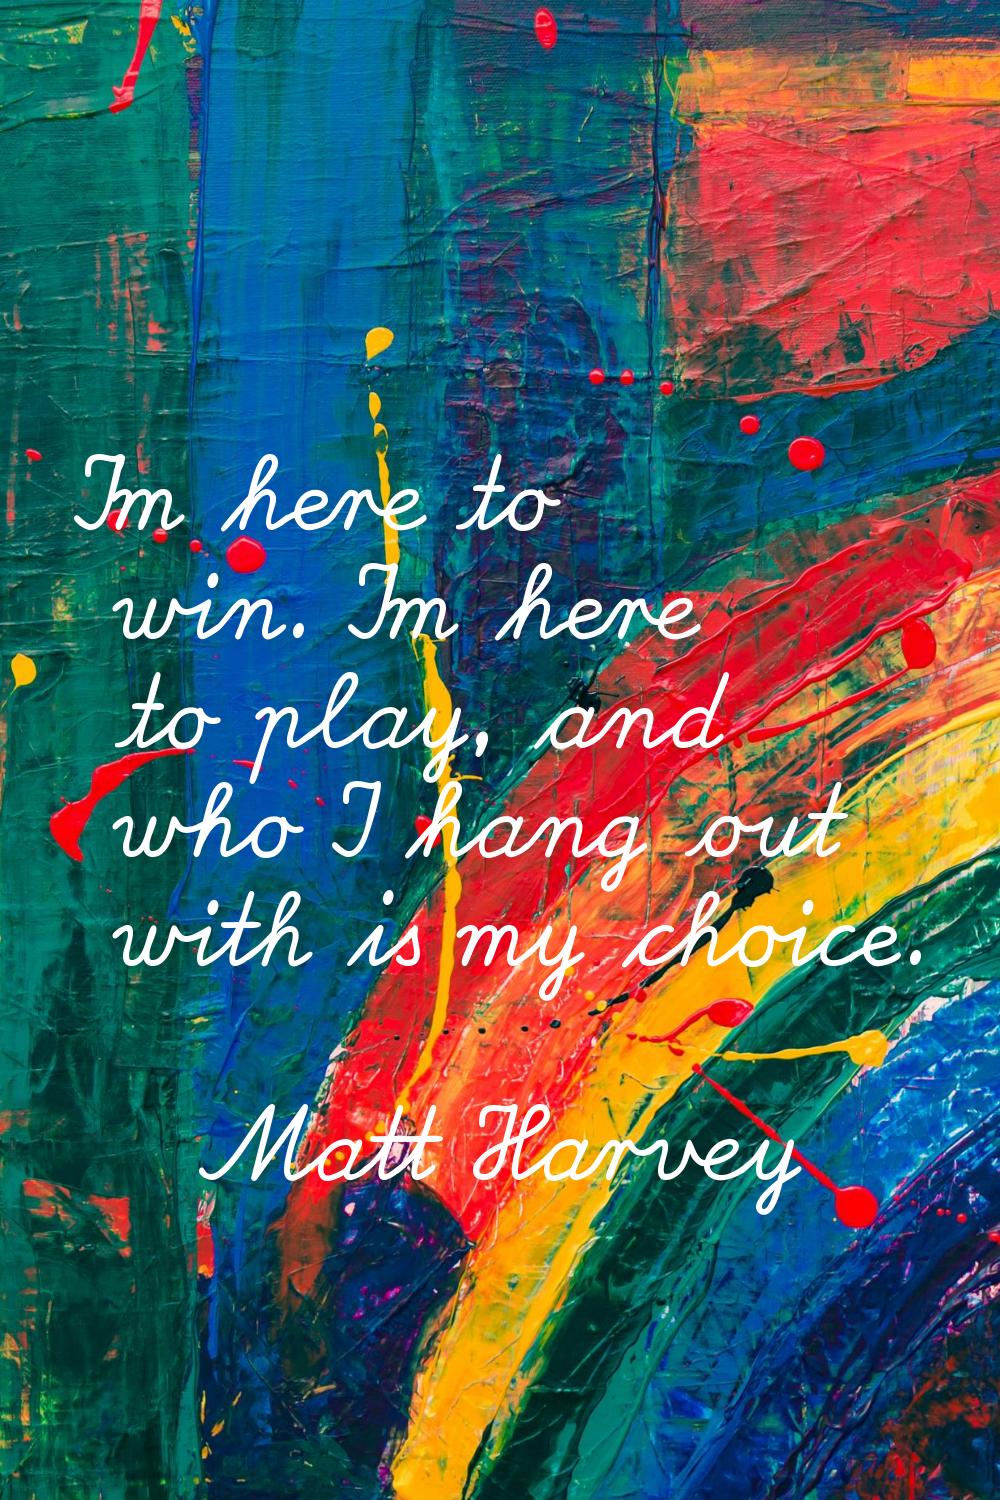 I'm here to win. I'm here to play, and who I hang out with is my choice.